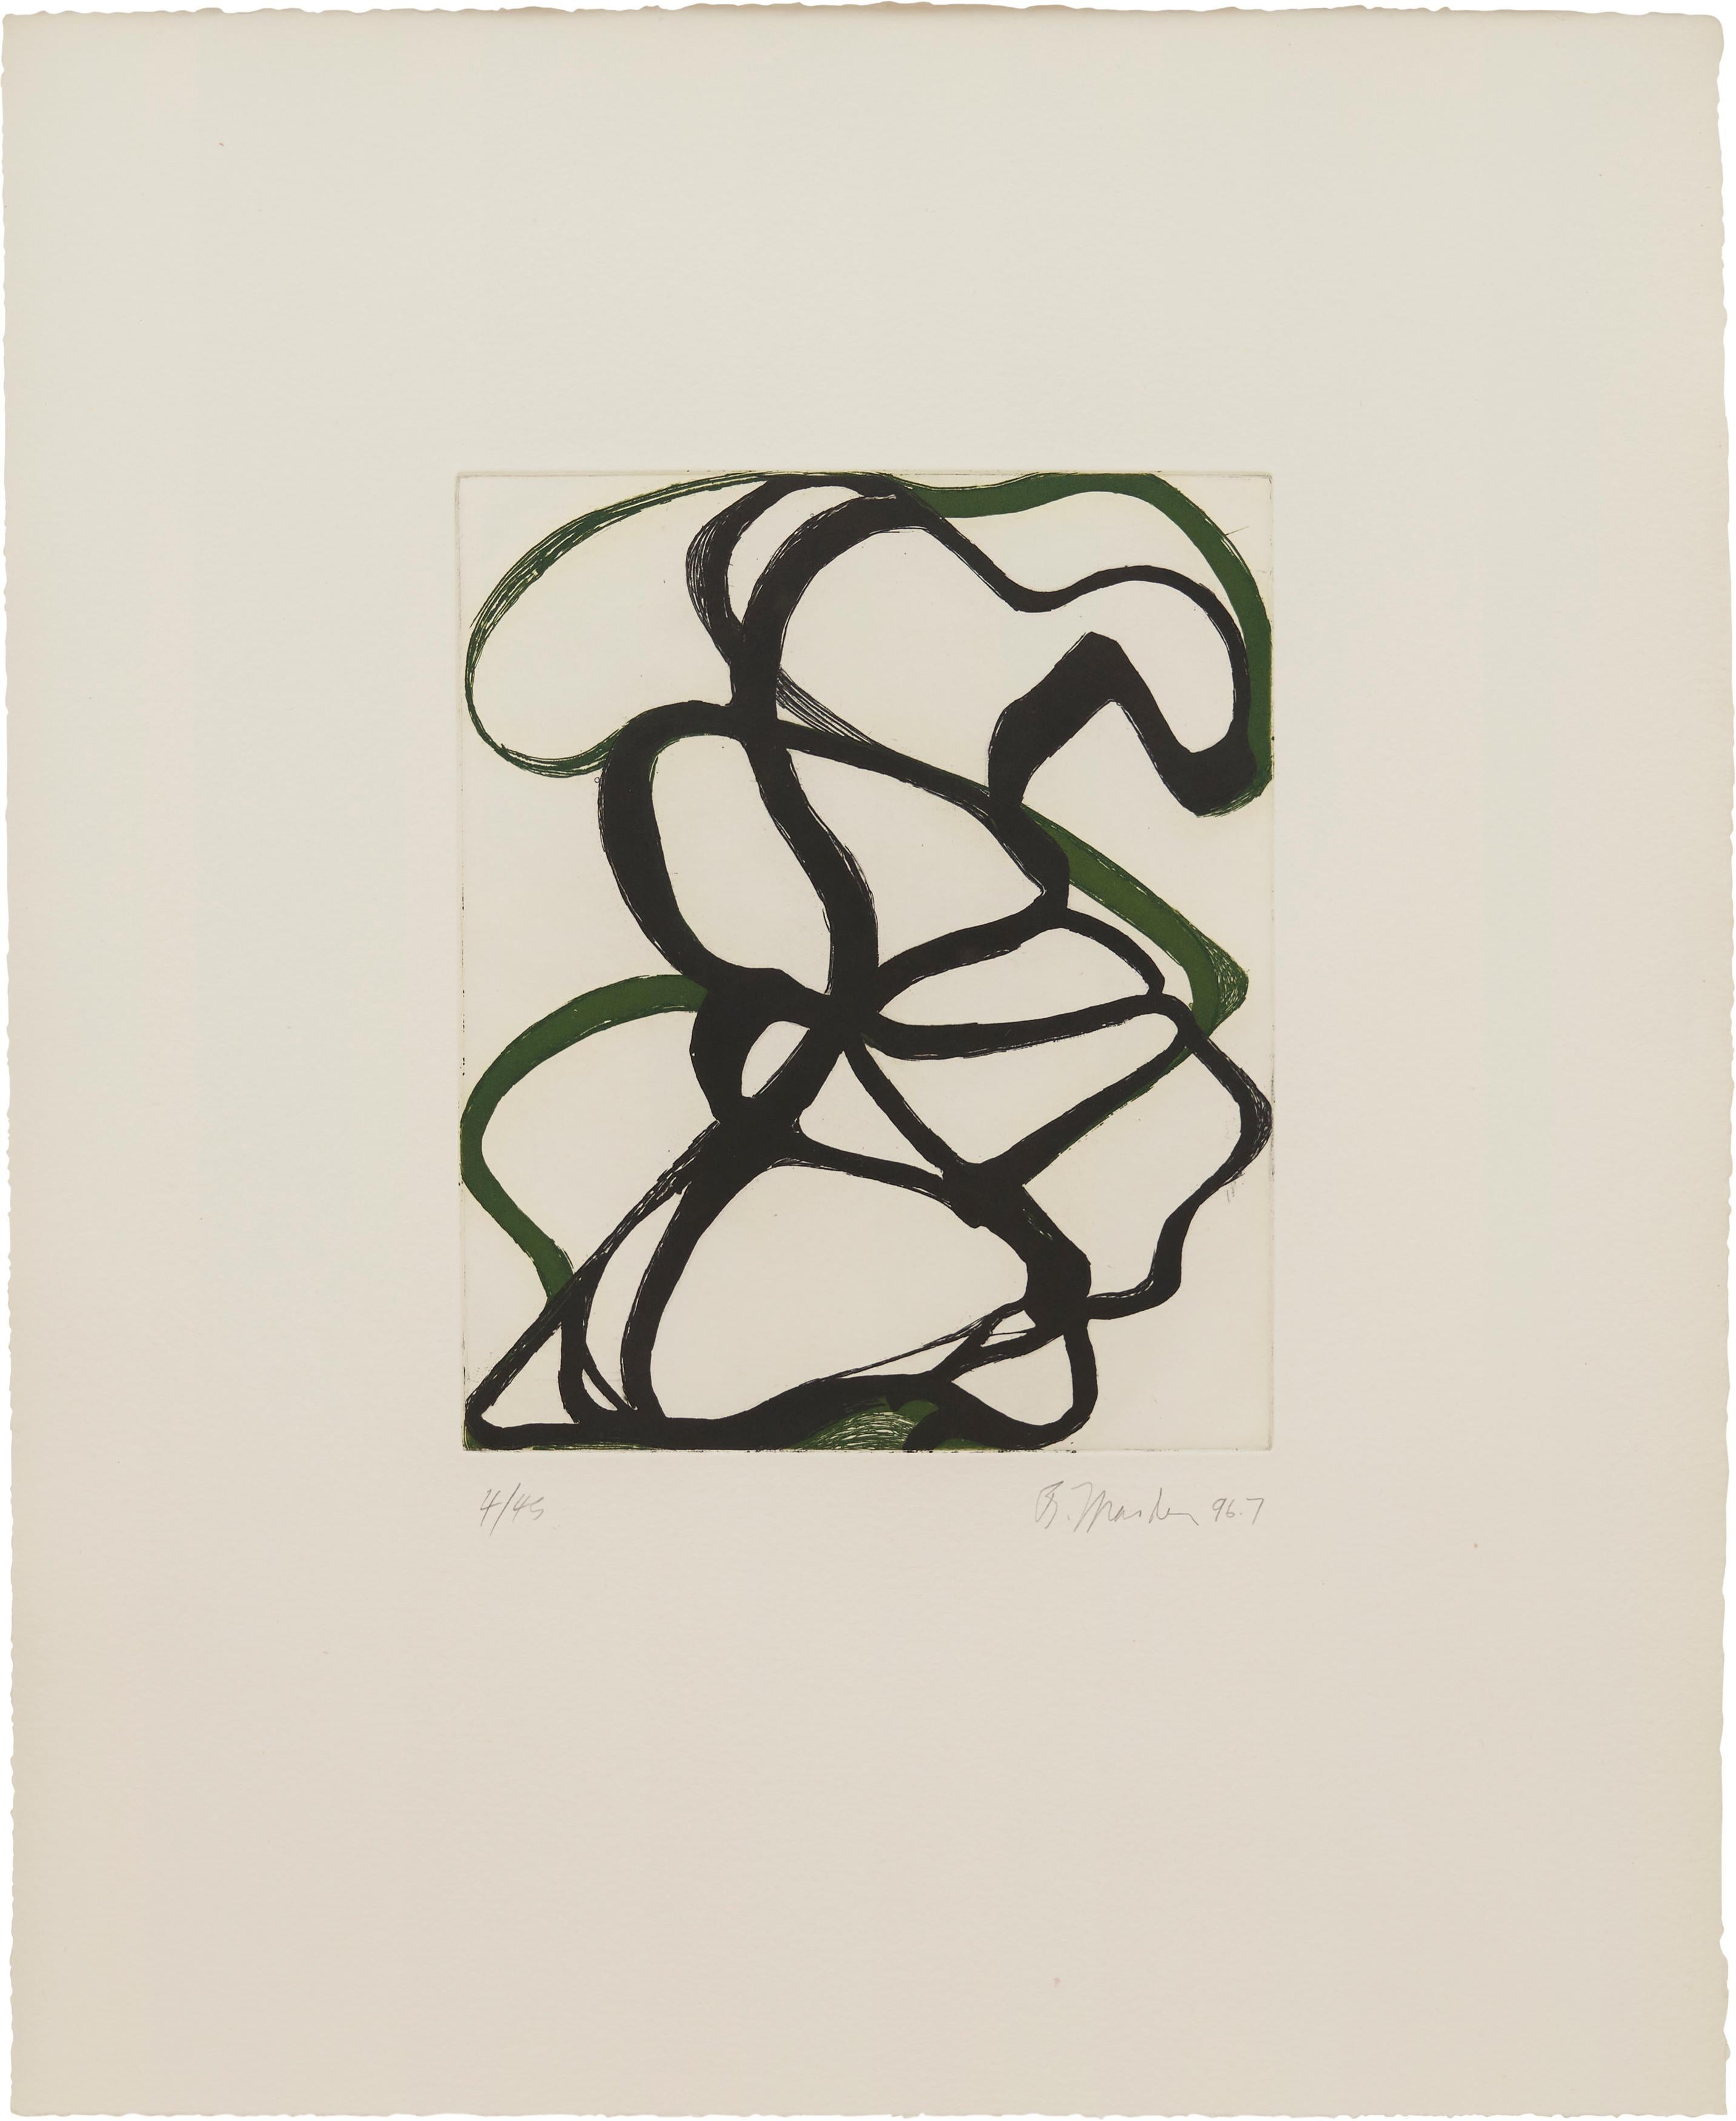 Abstract Print Brice Marden - The Fungoid Rock